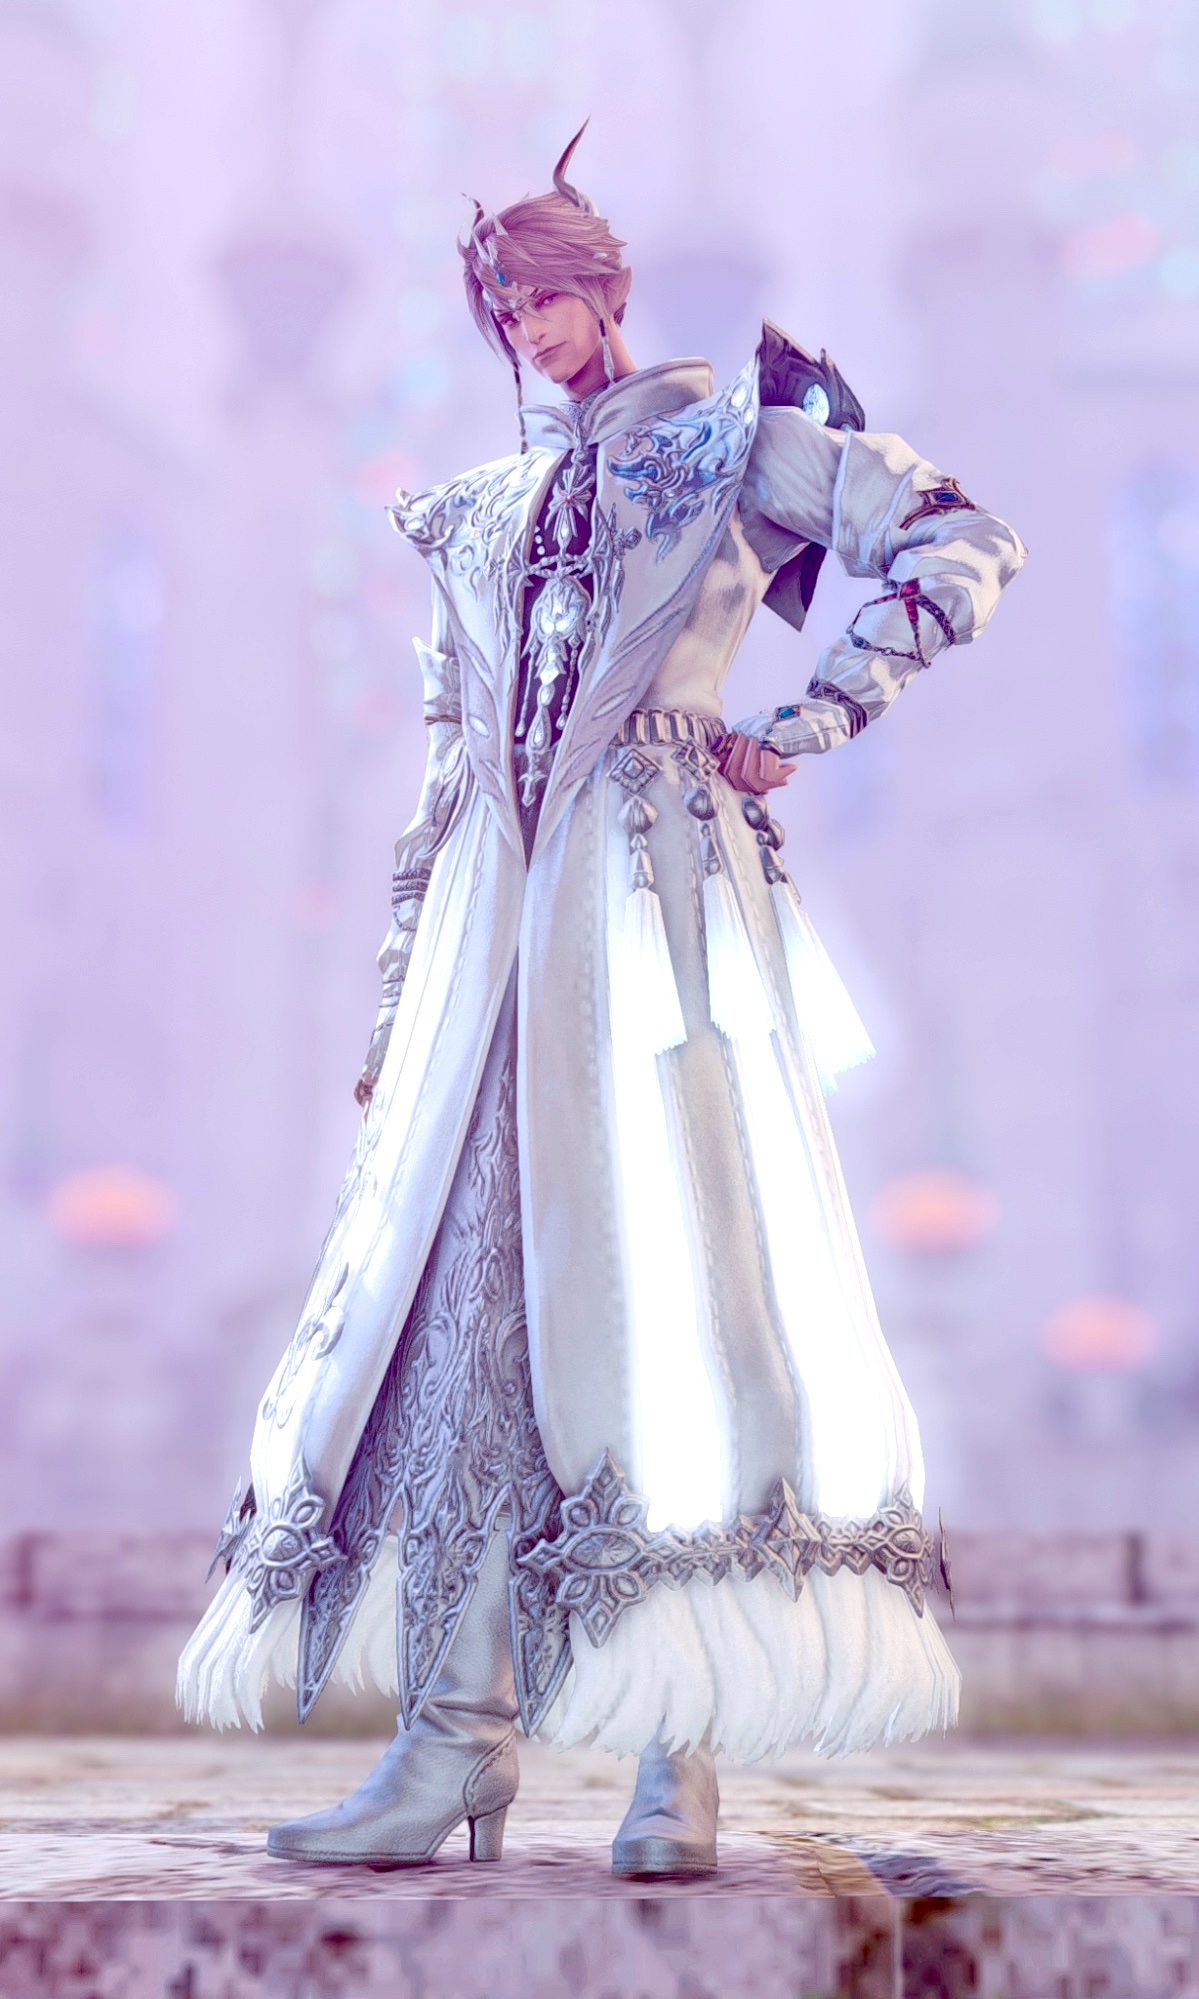 A FF14 avatar with pointy hair poses in their sparkly silver outfit and boots